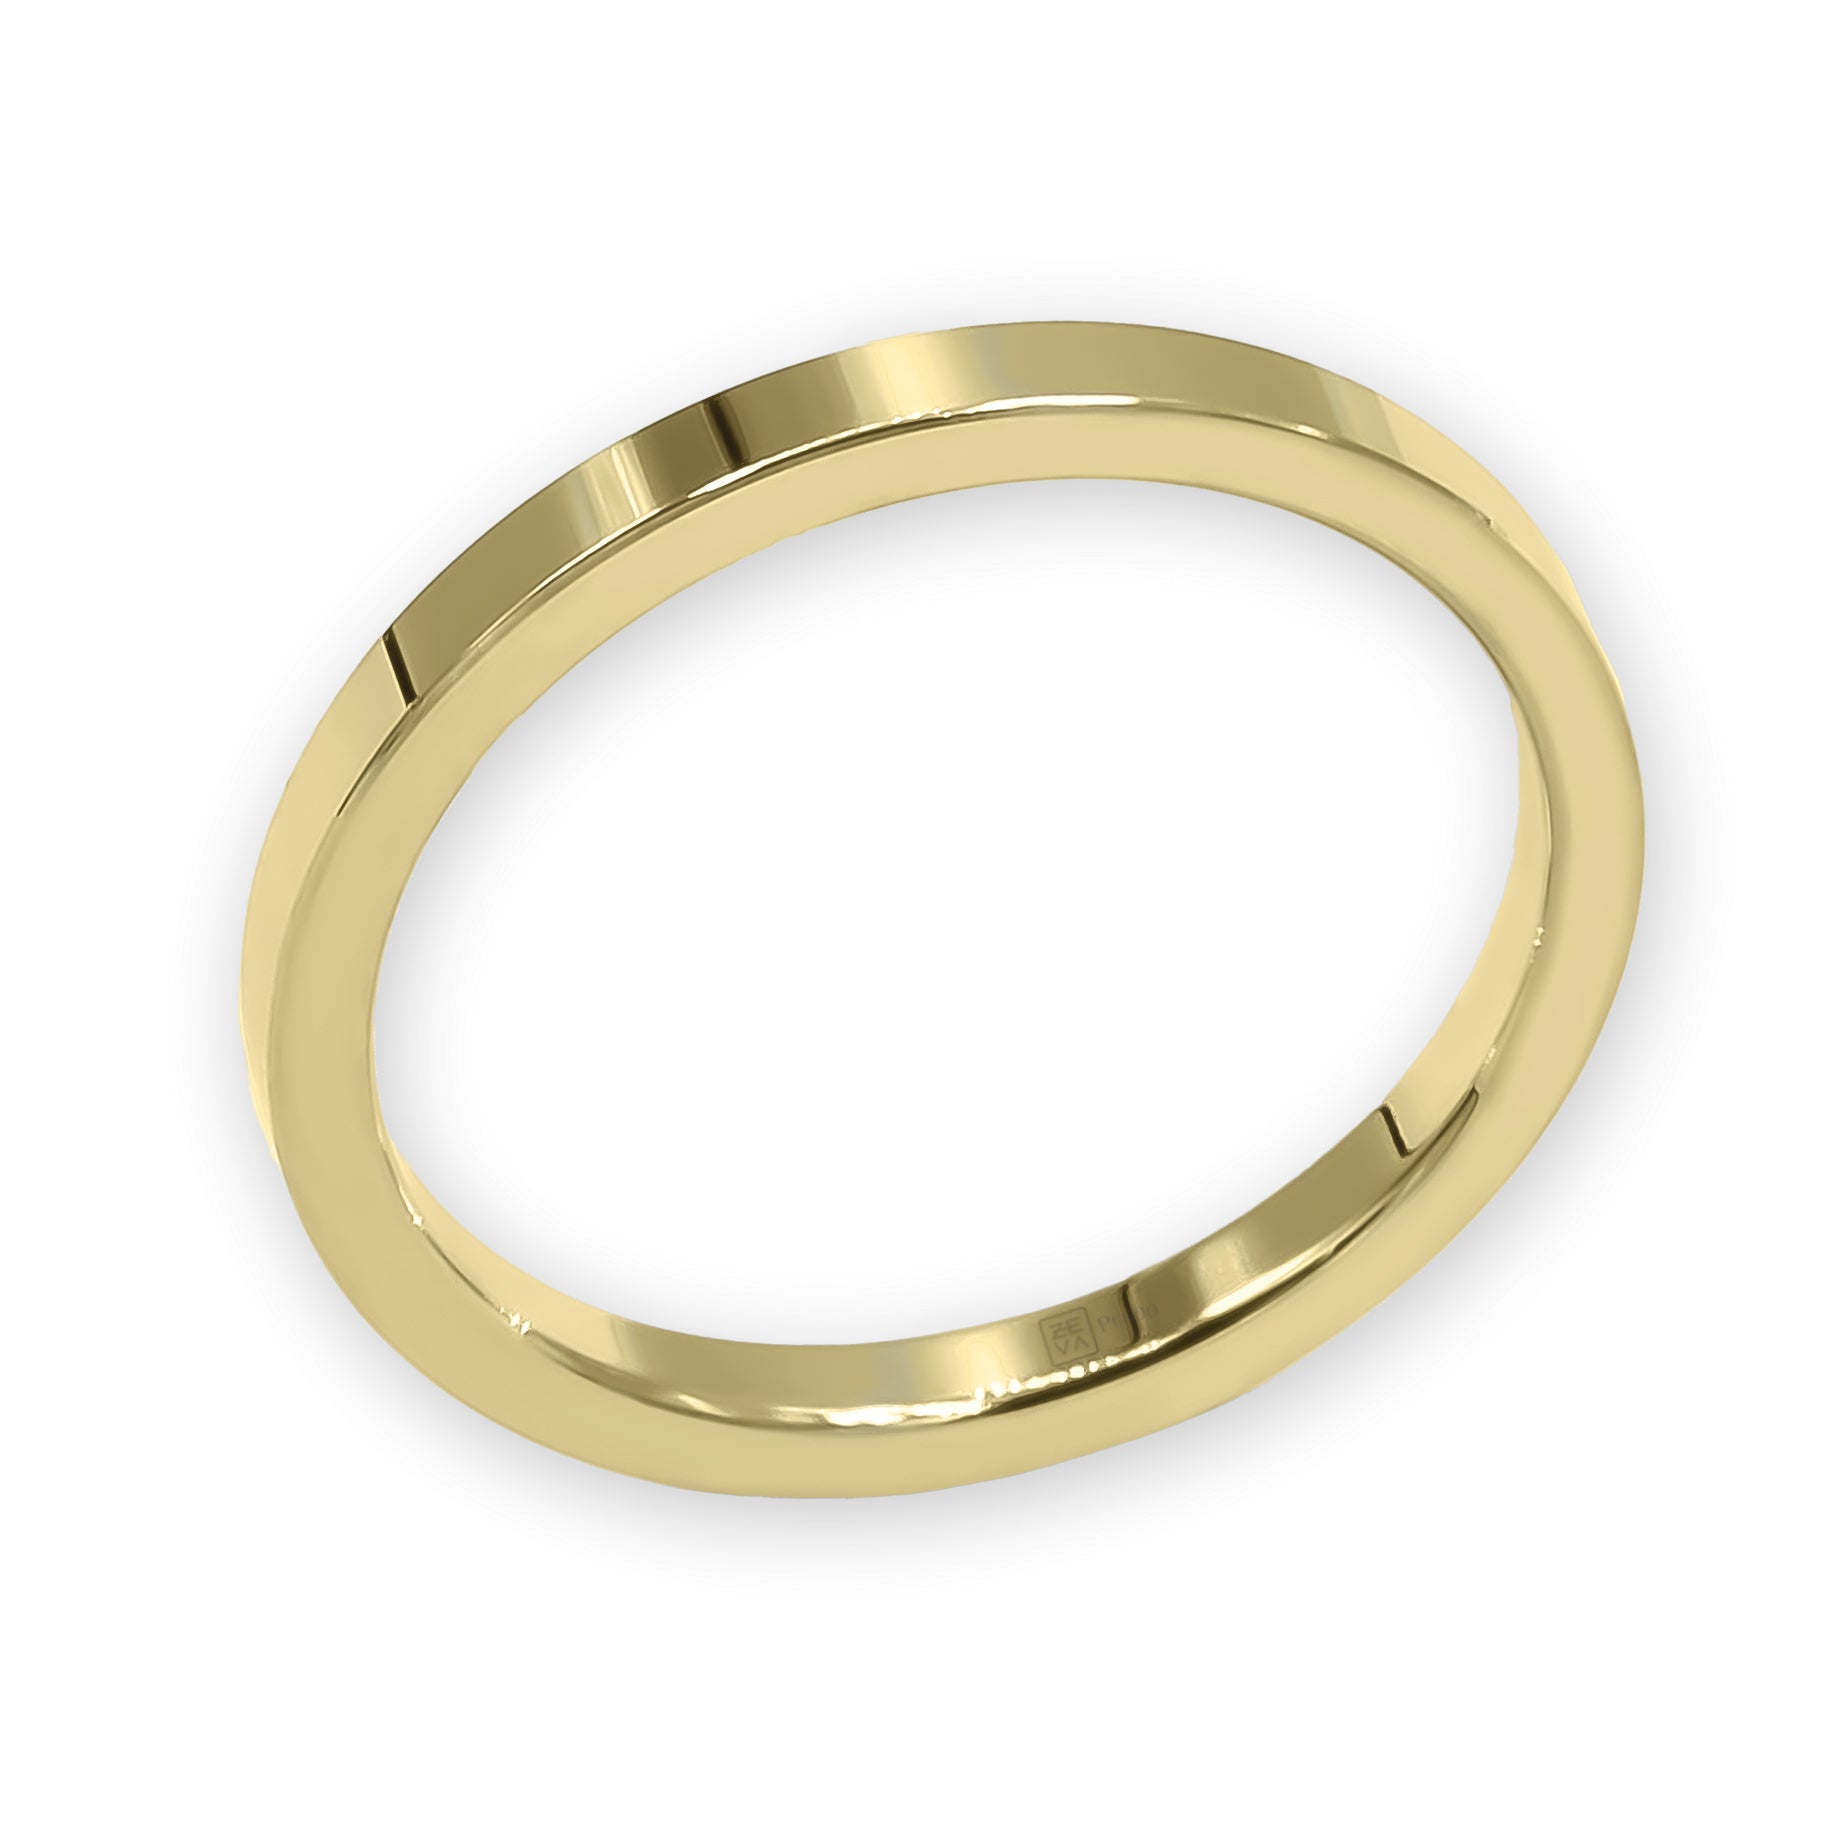 Bague EARTH IS ROUND 2mm profil plat or jaune 18k